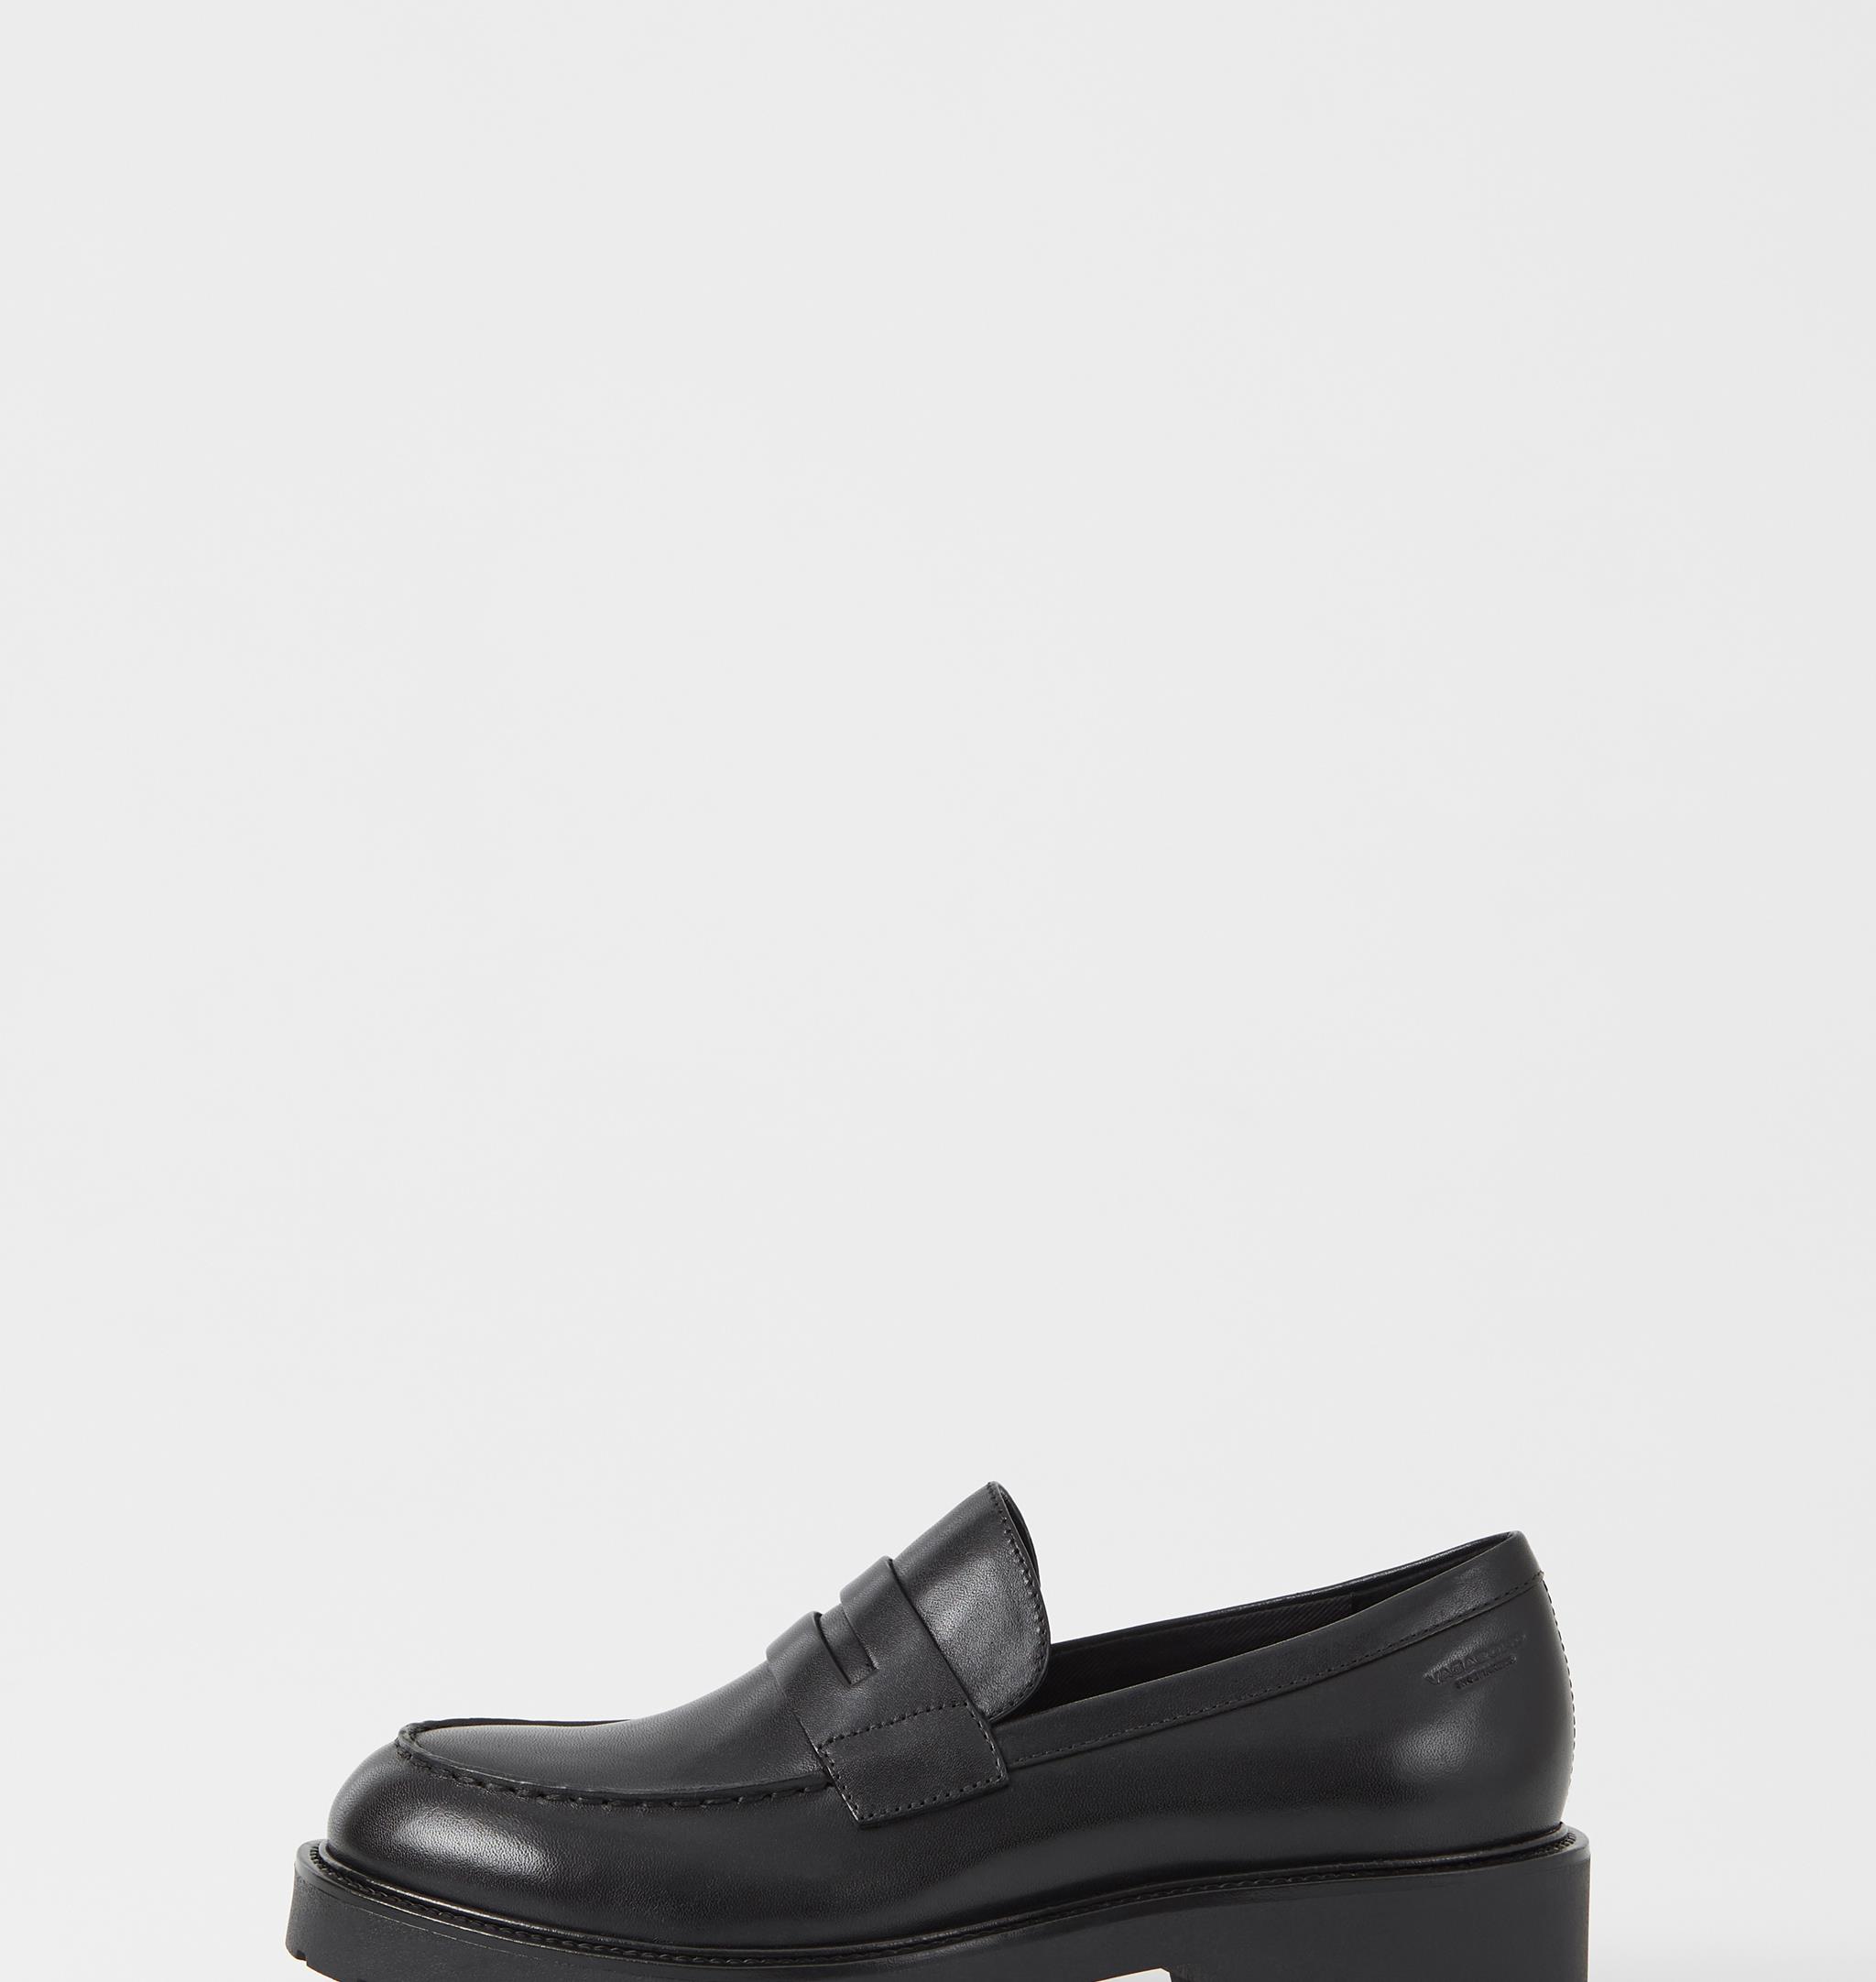 Womens Shoes Flats and flat shoes Loafers and moccasins Vagabond Shoemakers Leather Kenova Loafer in Black White 